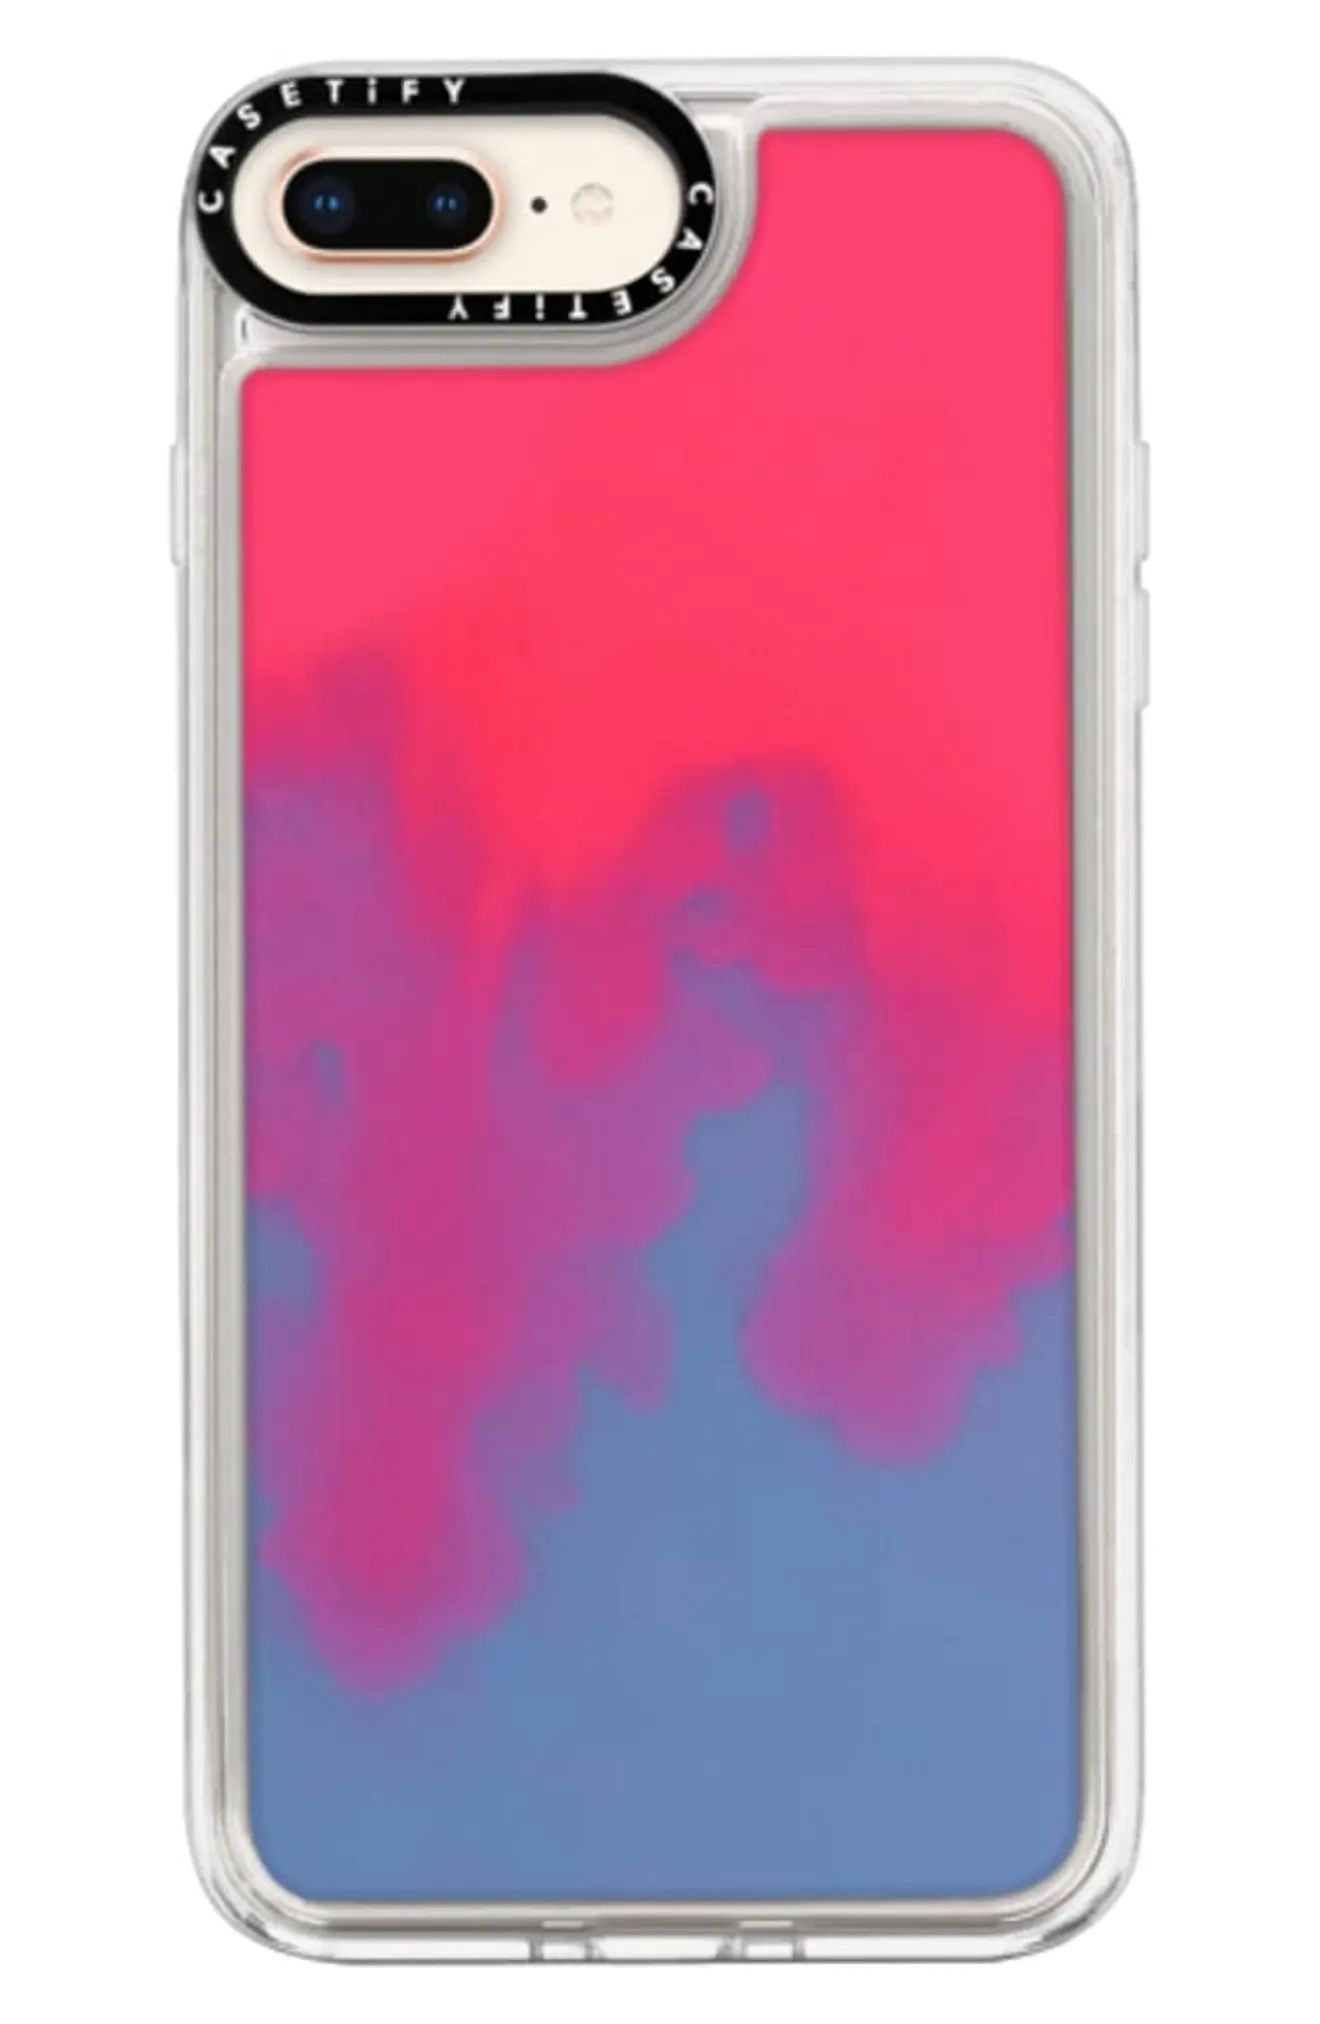 CASETiFY Neon Sand iPhone7/8 & 7/8 Plus Case, Size Iphone 7 in Hotline at Nordstrom | Nordstrom